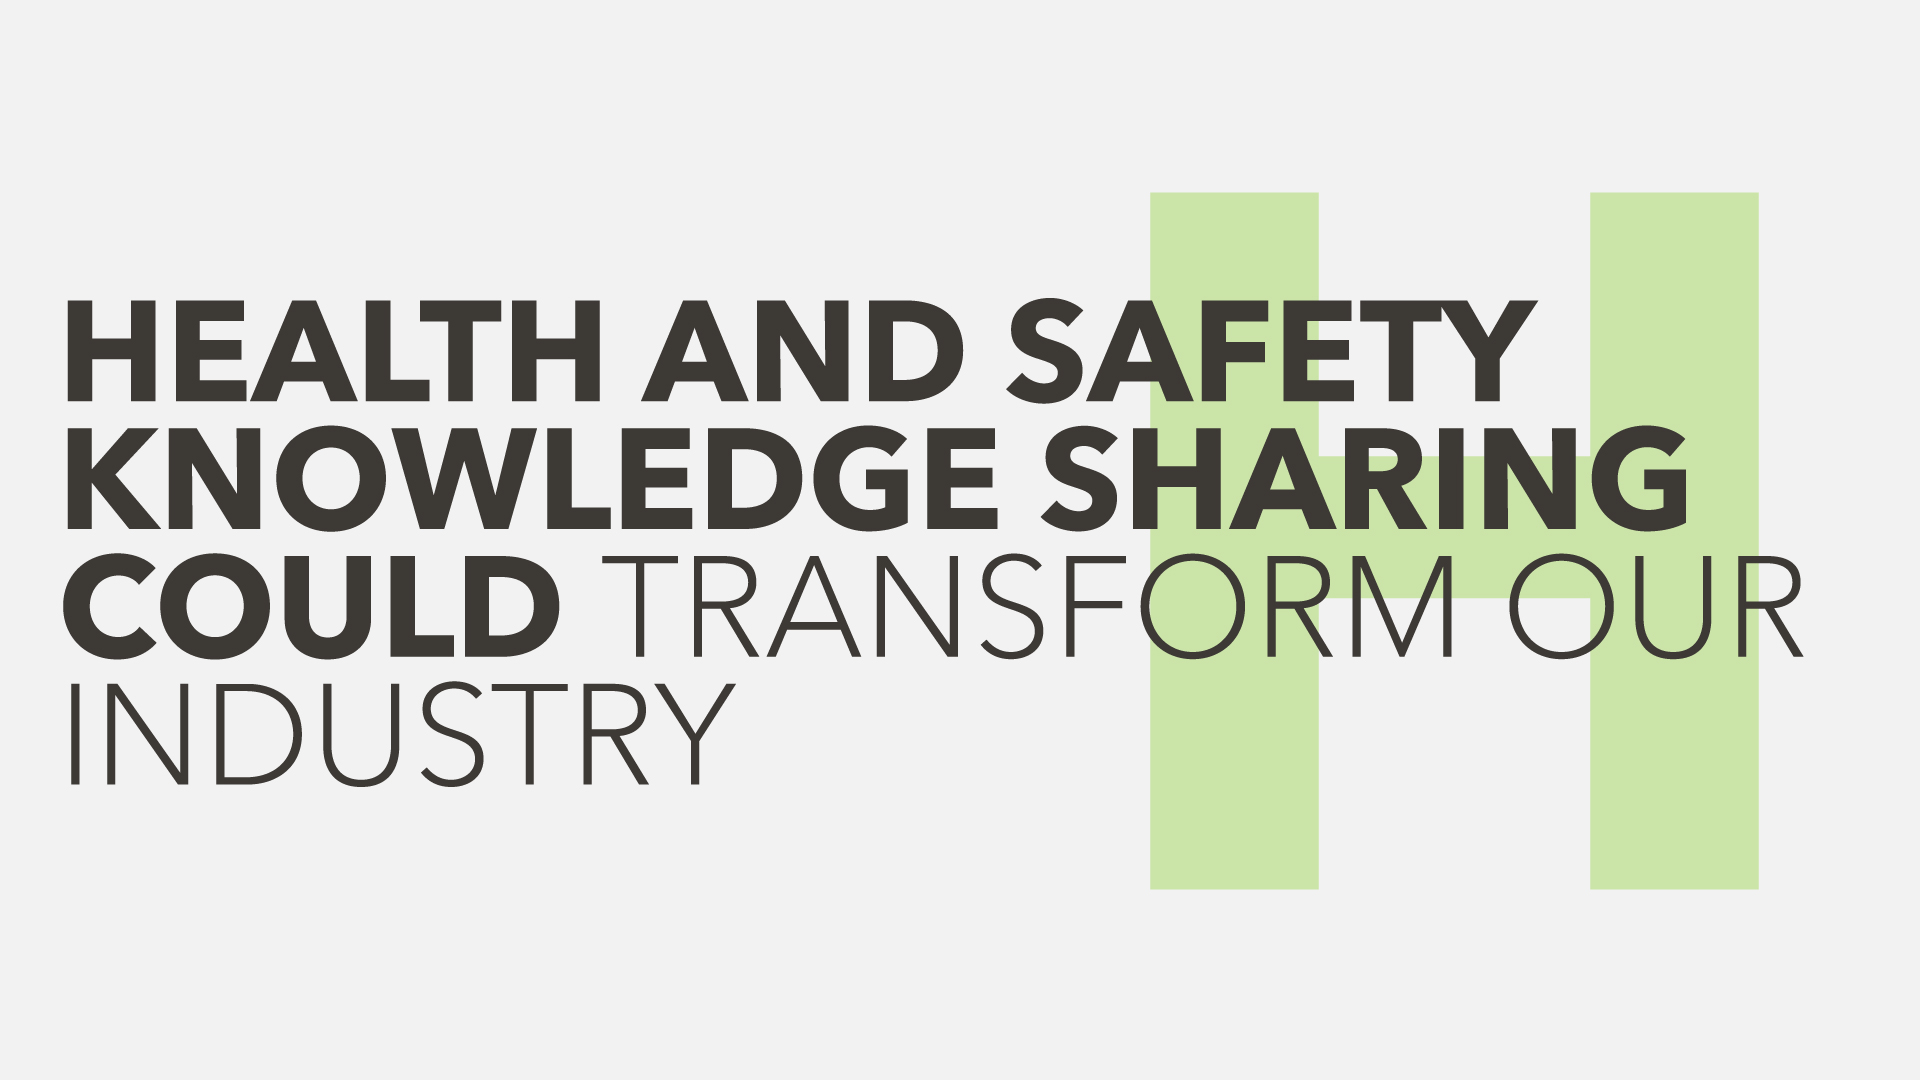 Health and safety knowledge sharing could transform our industry